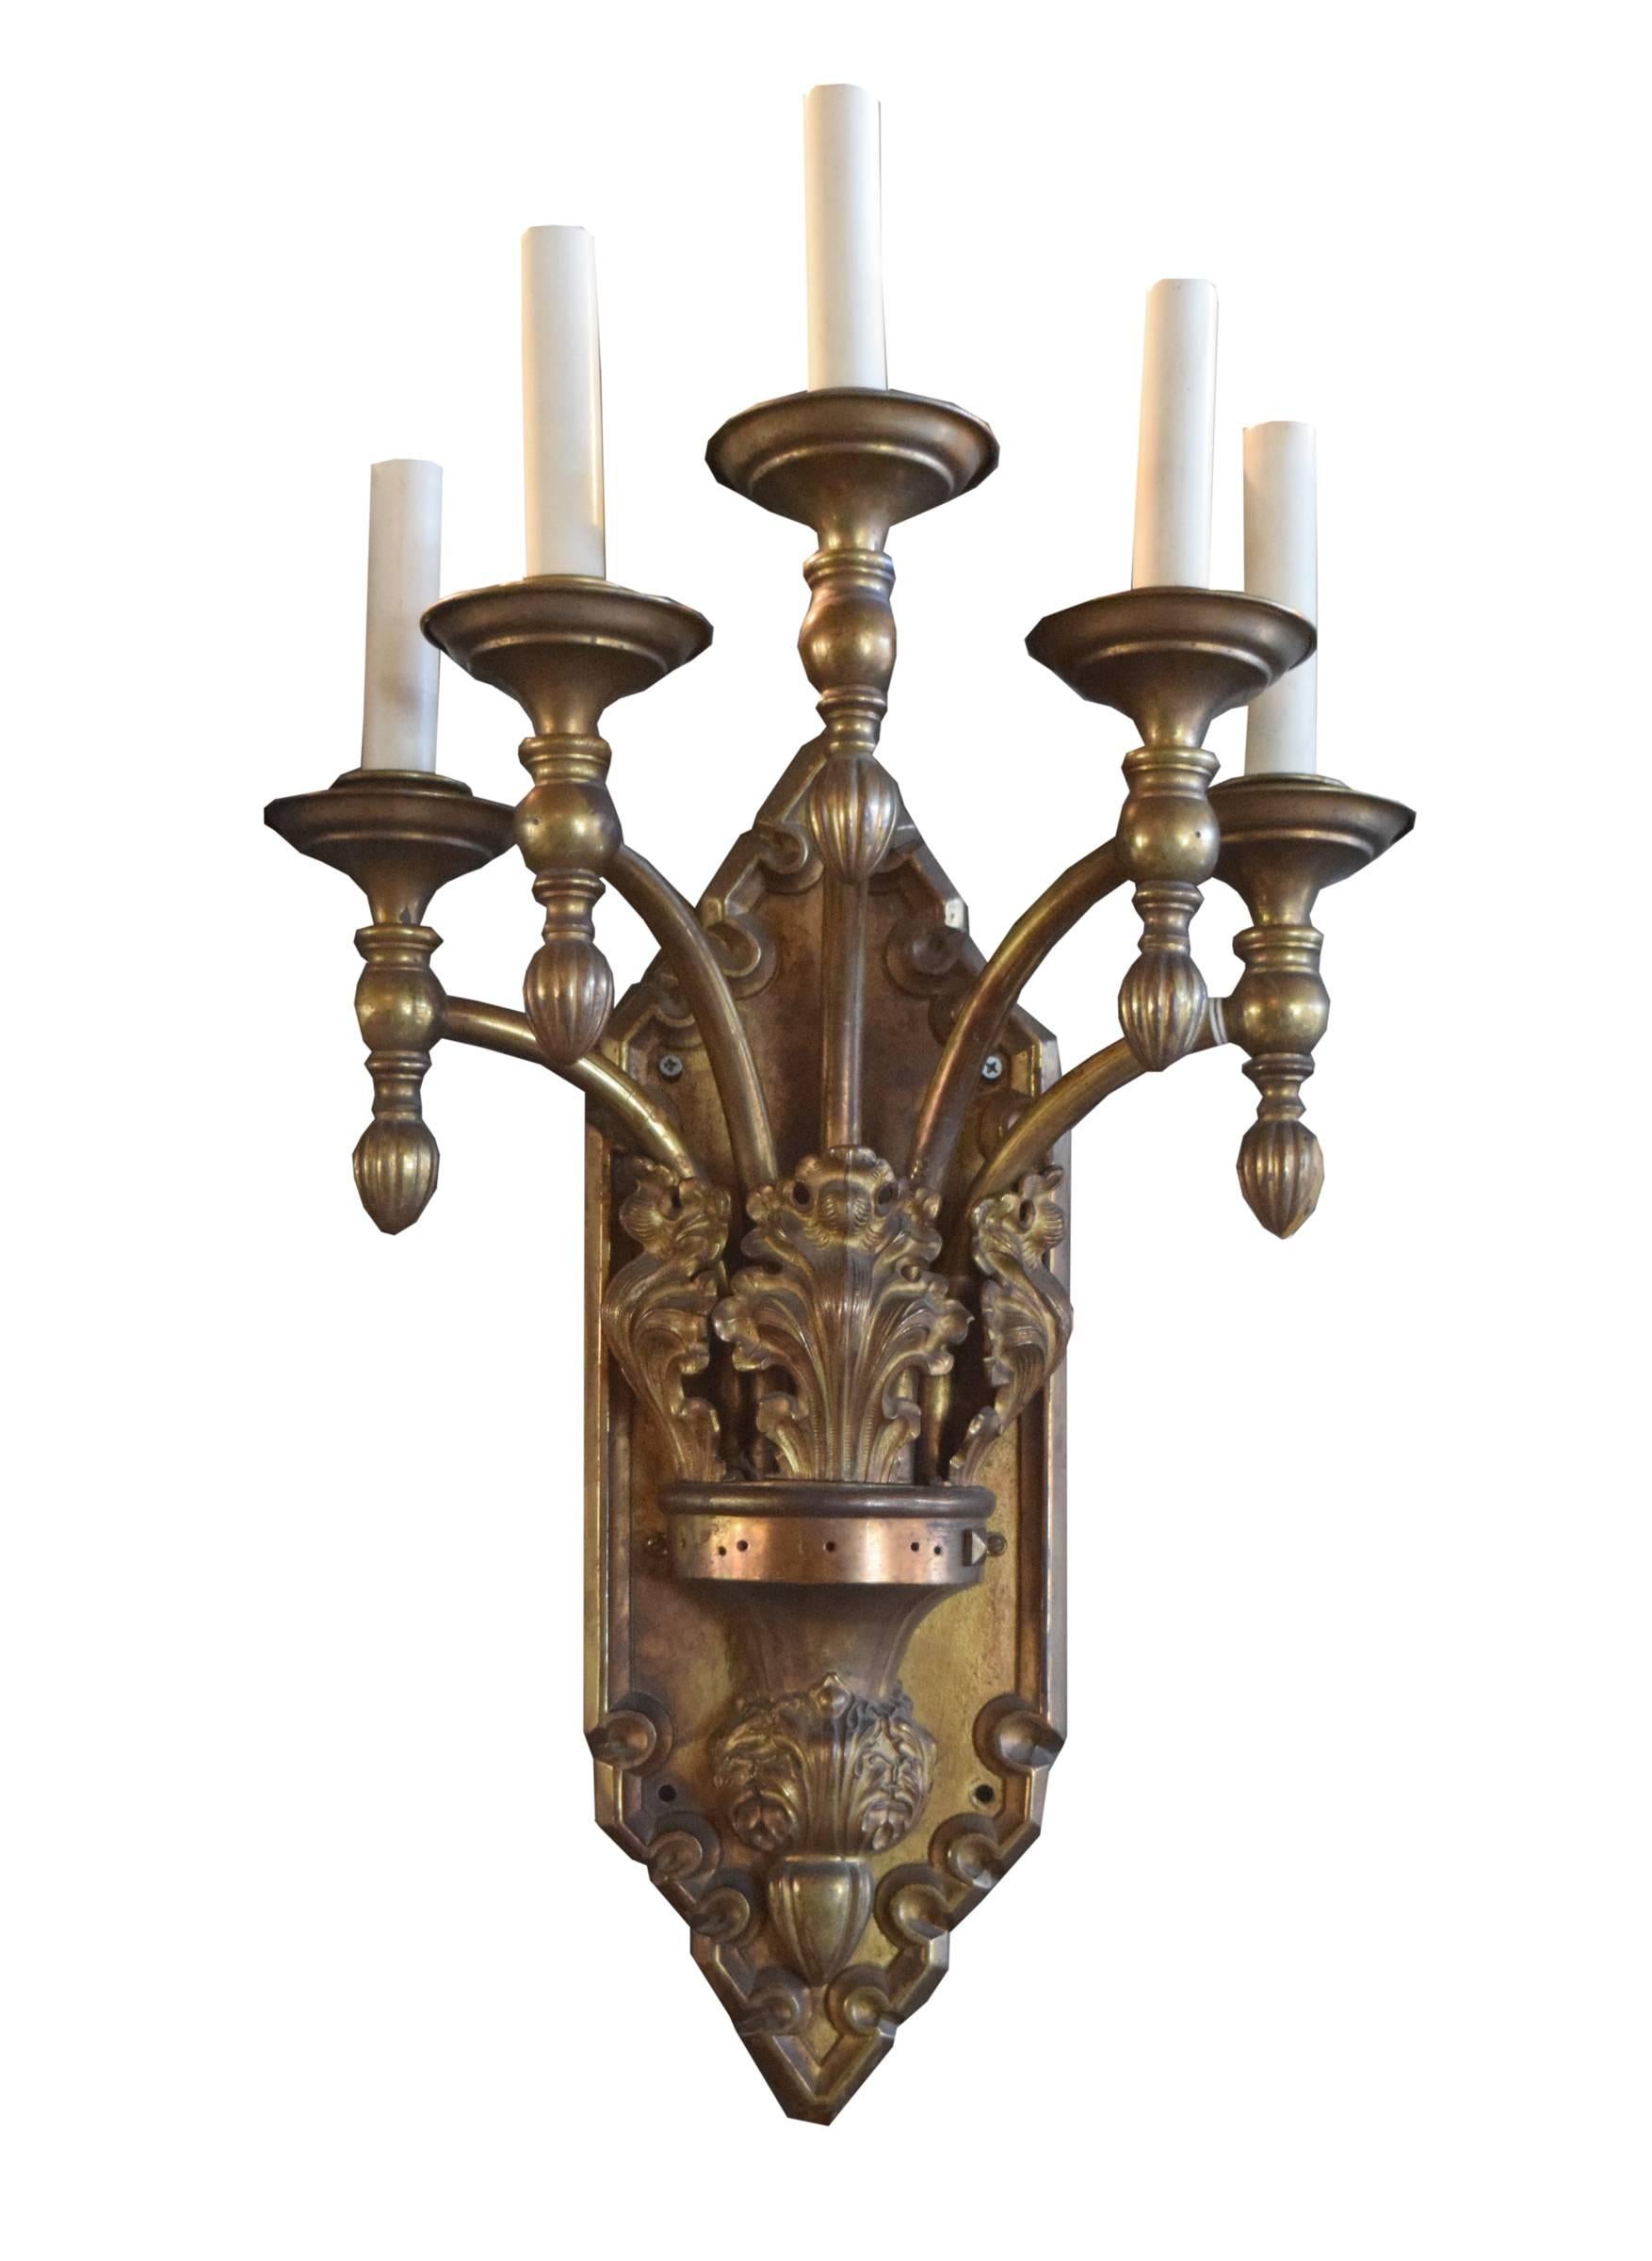 A pair of great quality bronze American sconces, each with five curved arms, acanthus leaf detail, and a fabulous back plate, circa 1920. Need to be re-wired.